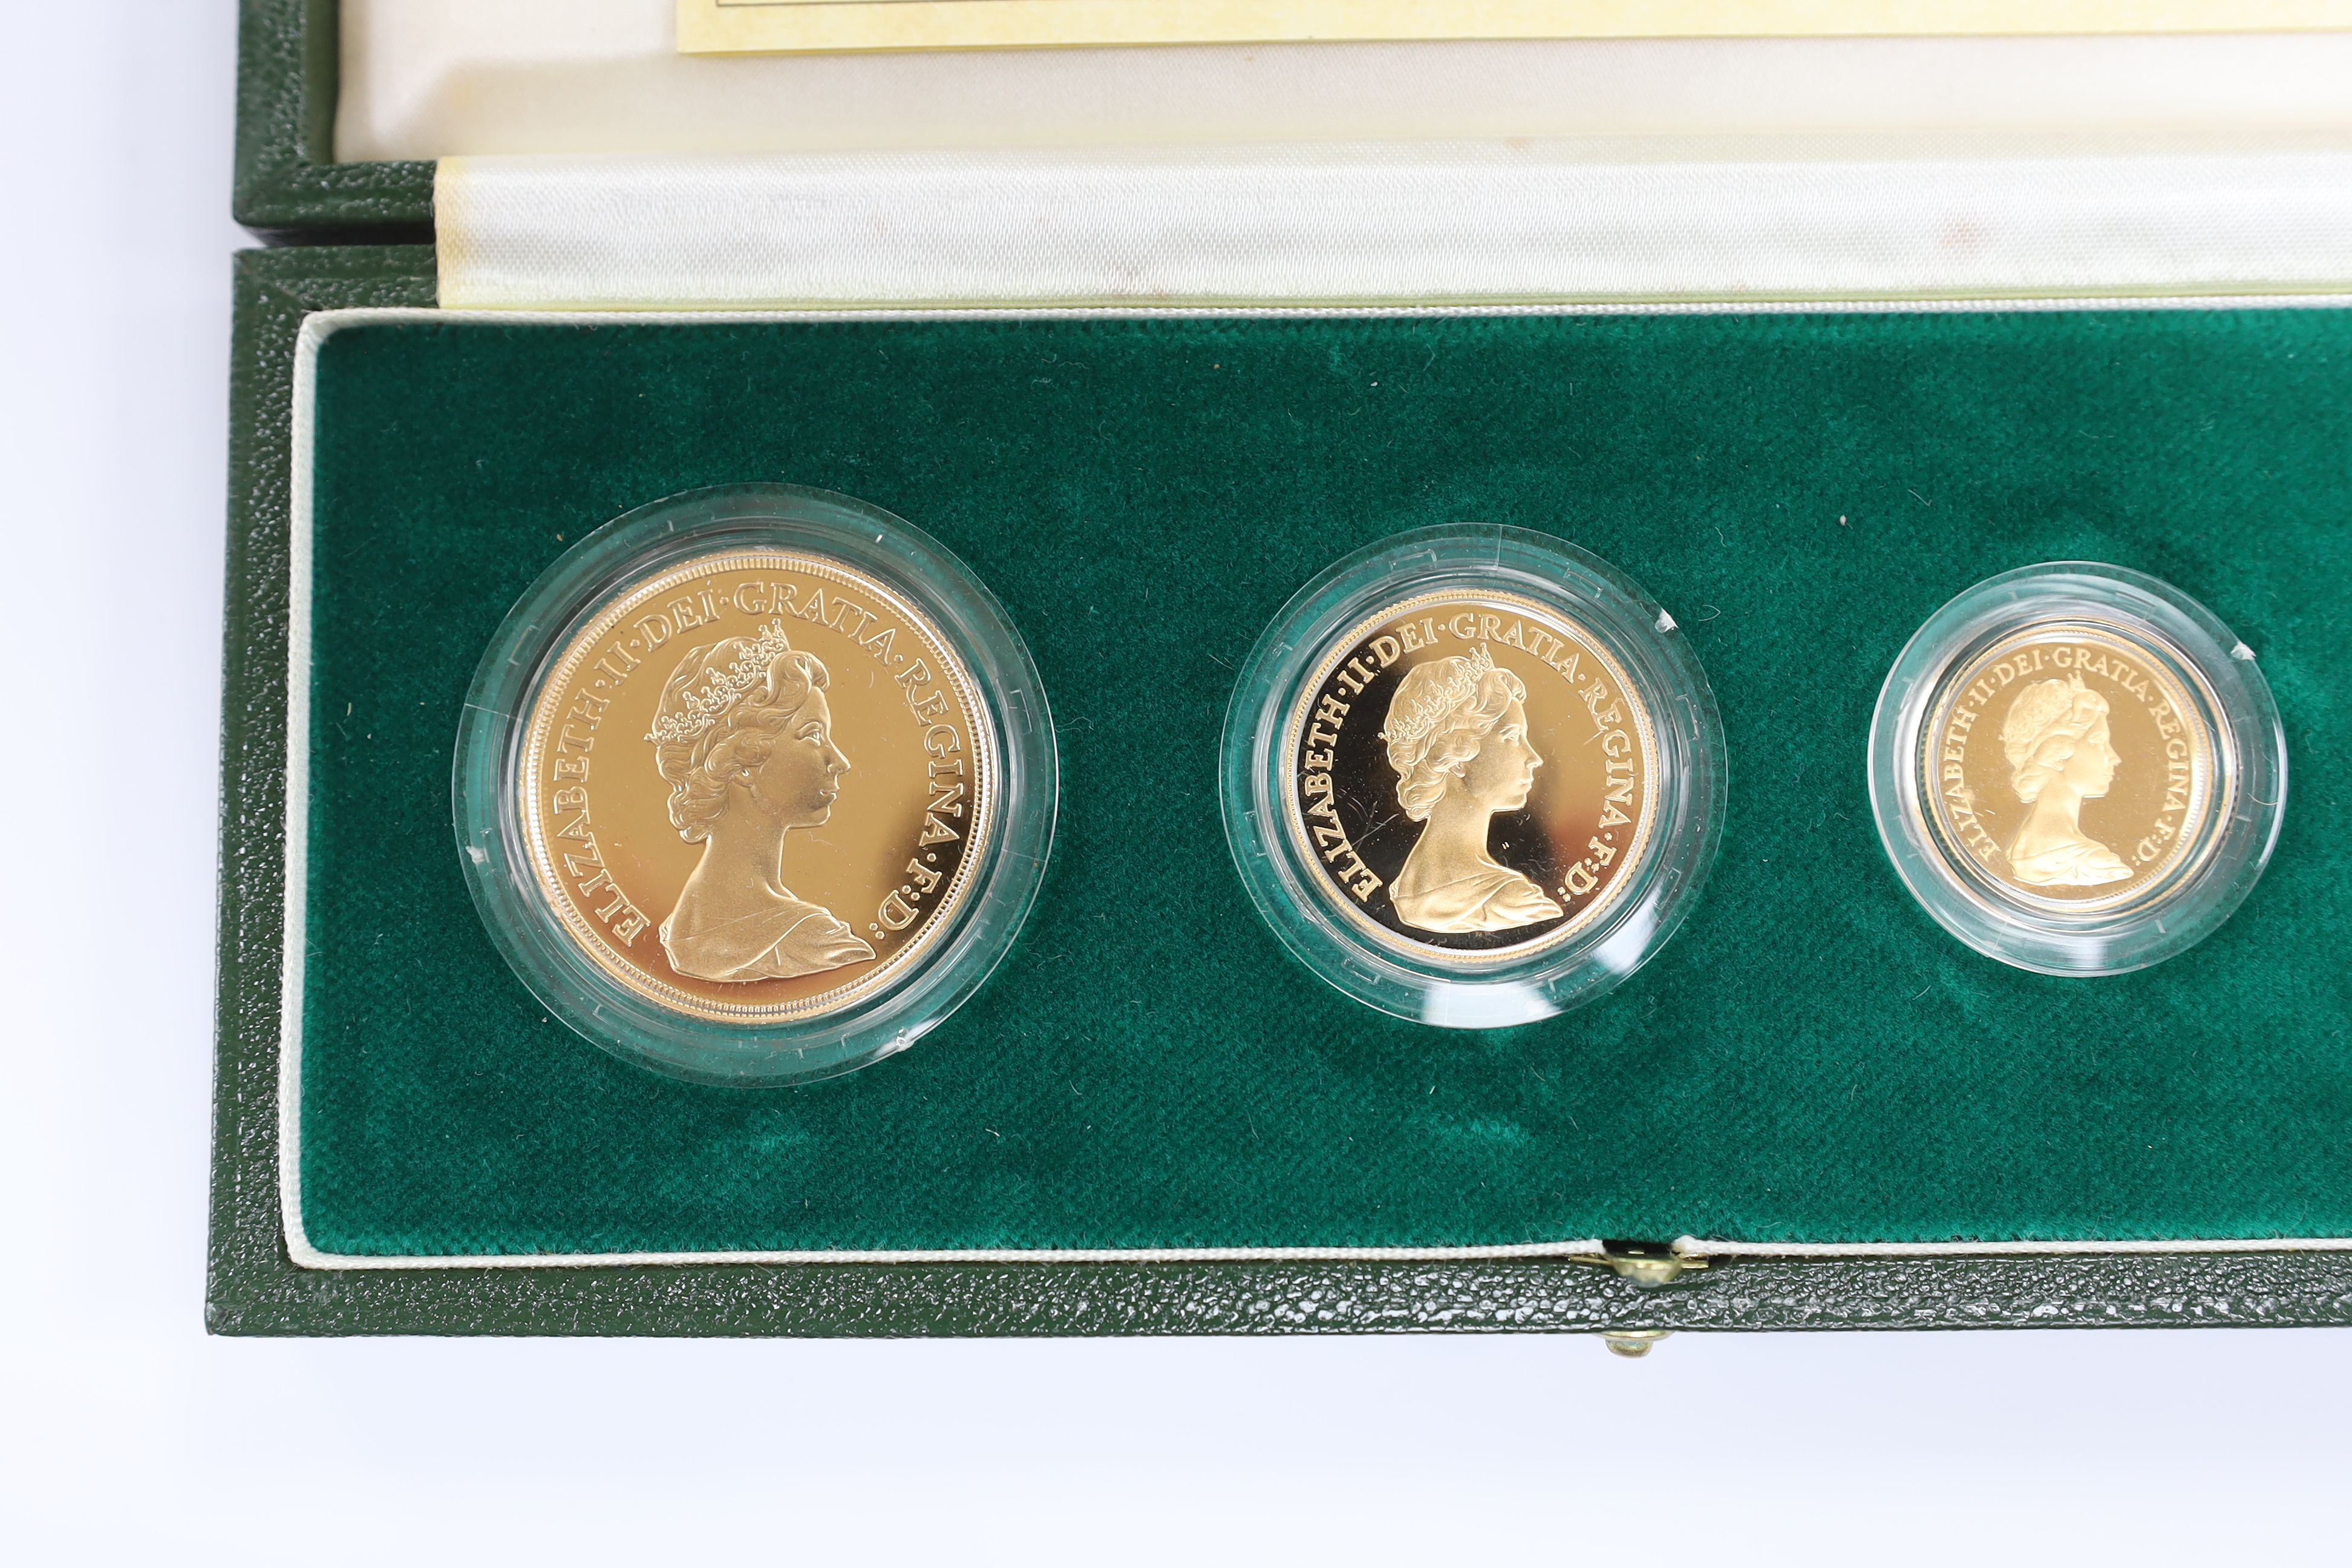 British gold coins - A Royal Mint UK QEII Gold Proof Set, 1980, comprising £5, £2, sovereign and half sovereign, in case of issue with papers